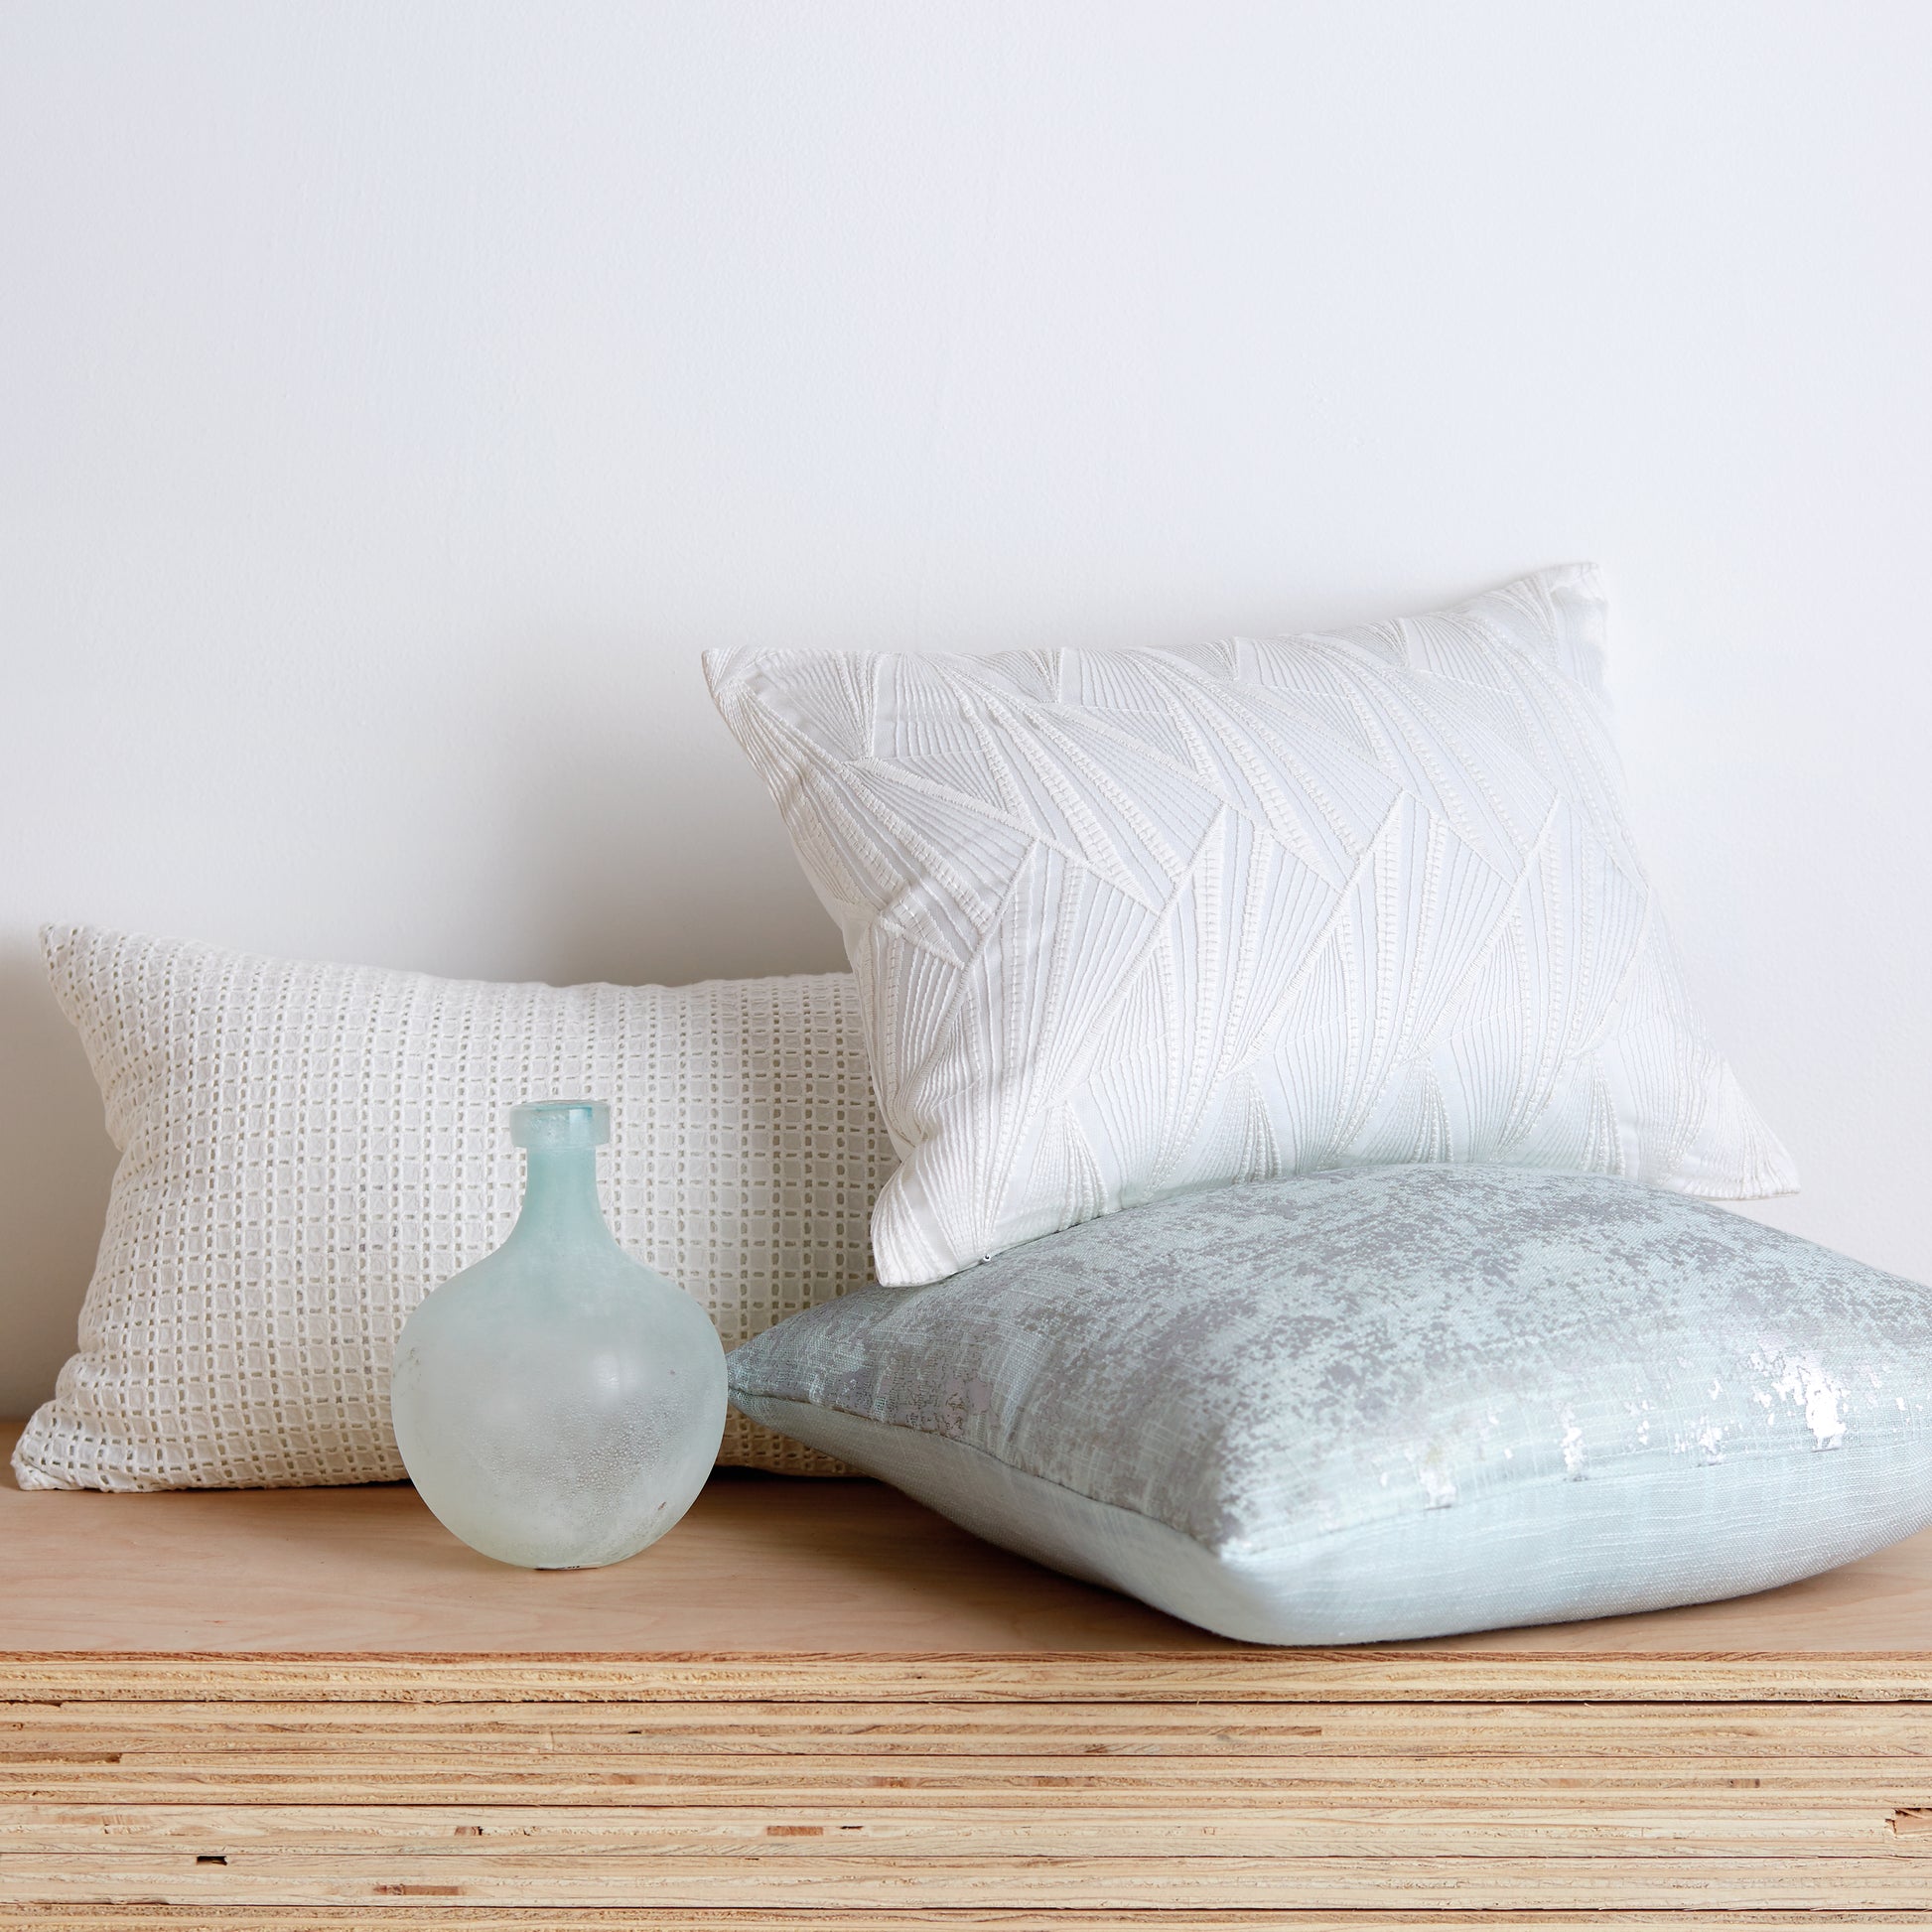 DKNY Refresh Decorative Pillow Collection